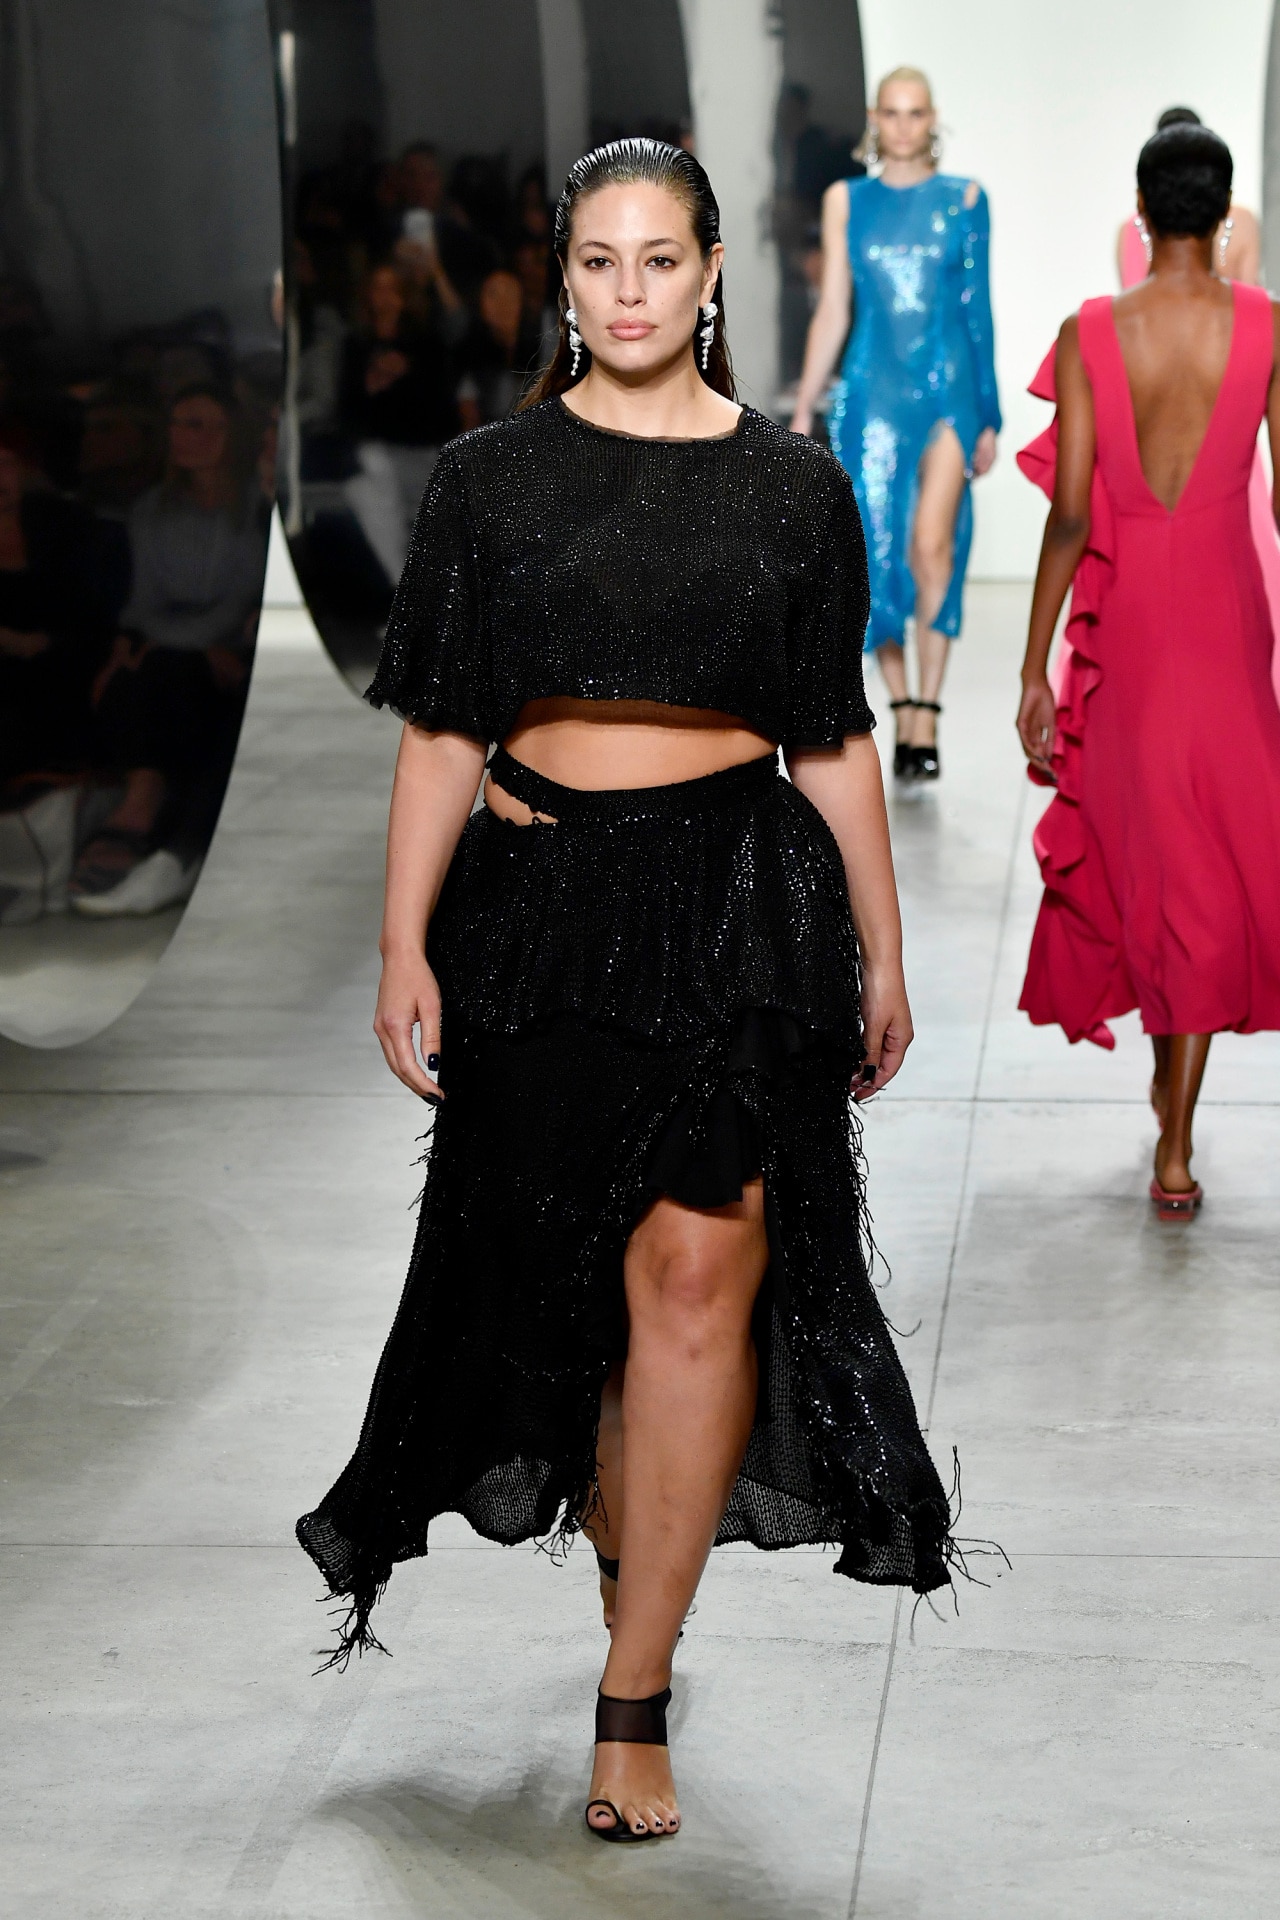 Plus-size modelling: Will high end fashion ever be ahead of the curve?, The Independent